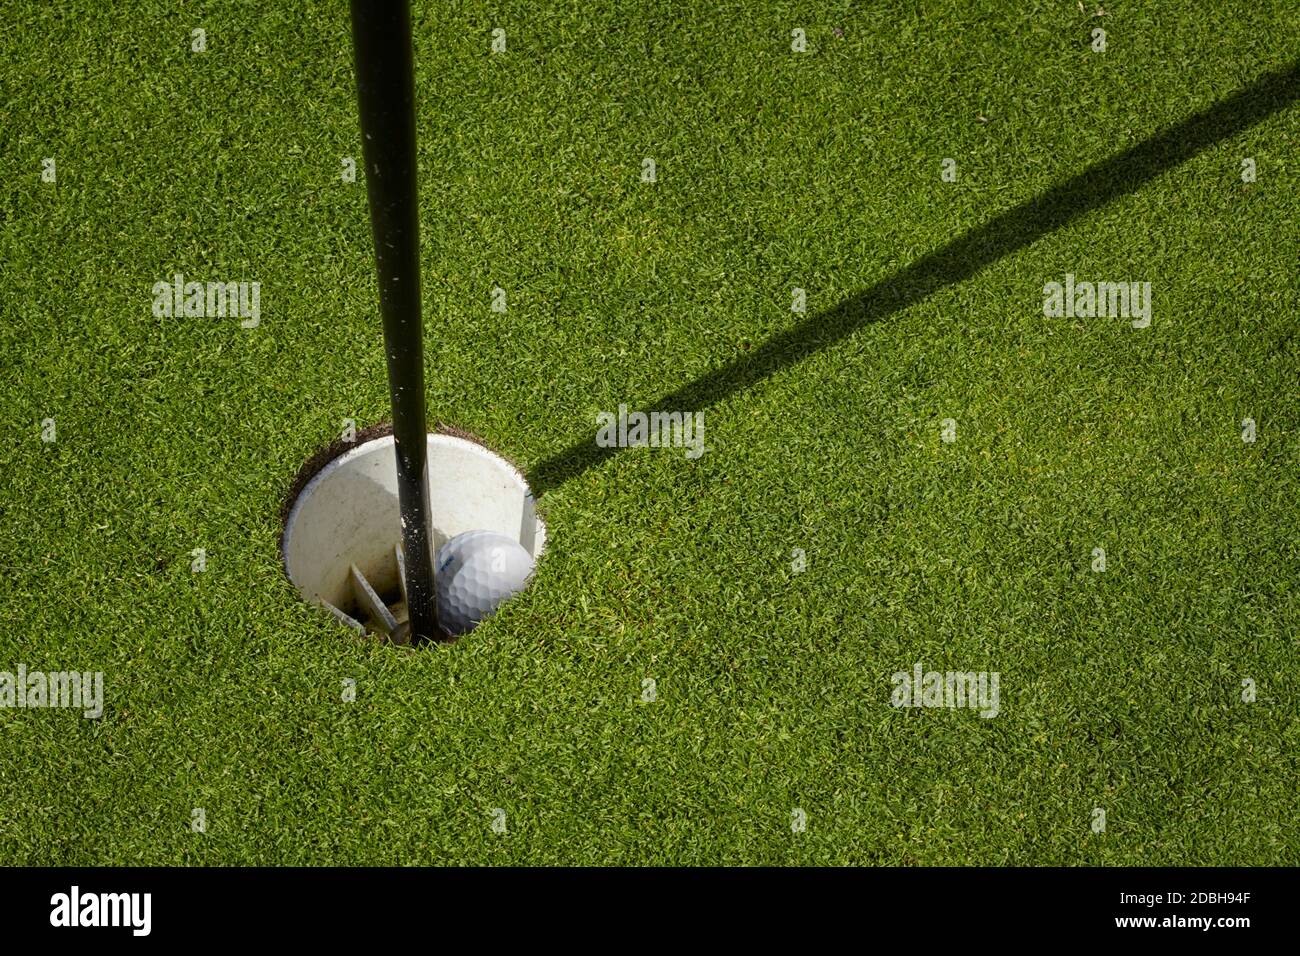 Golf ball sit inside cup on golf course putting green with flag. Stock Photo